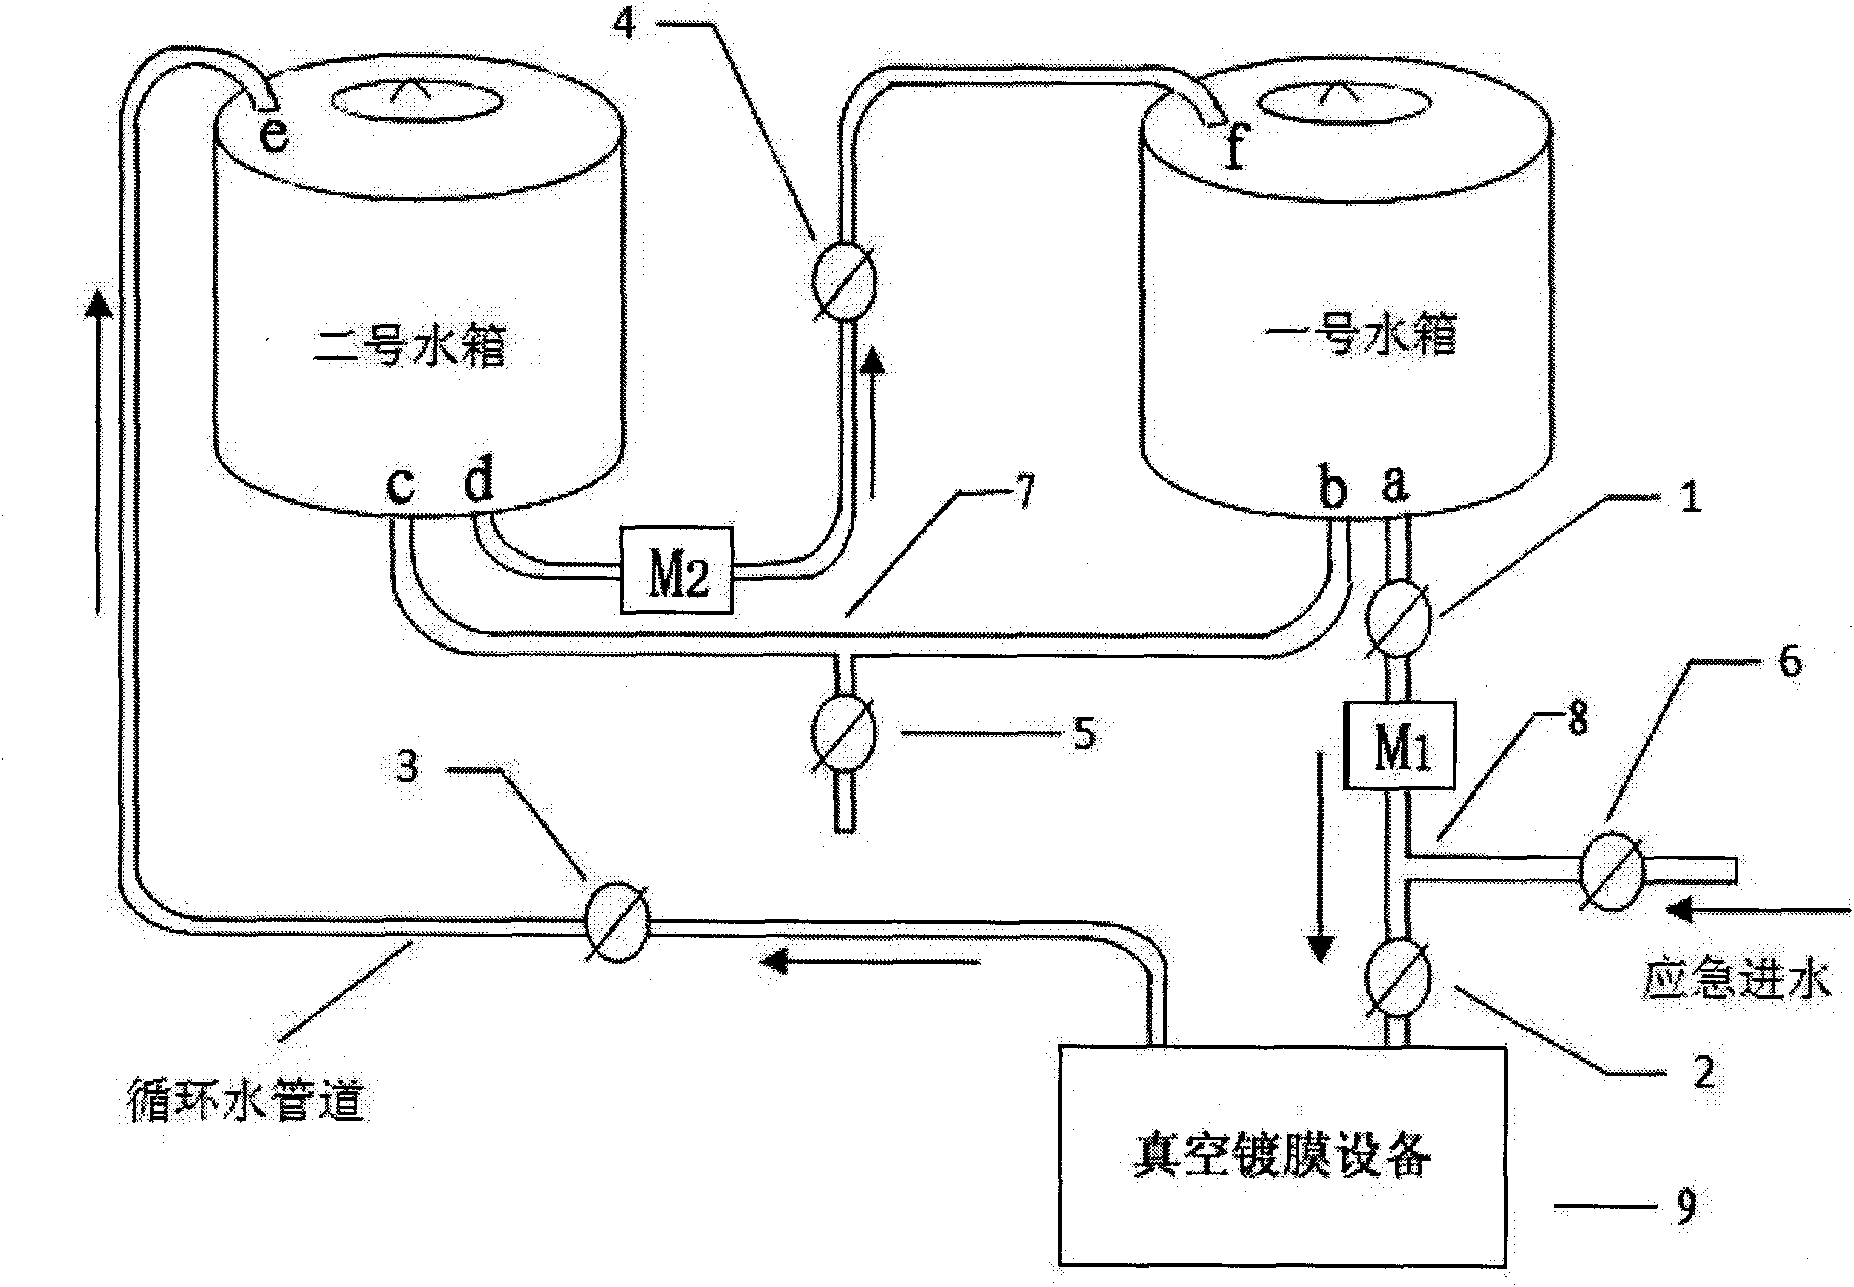 Circulating cooling water system of diffusion pump of vacuum coater